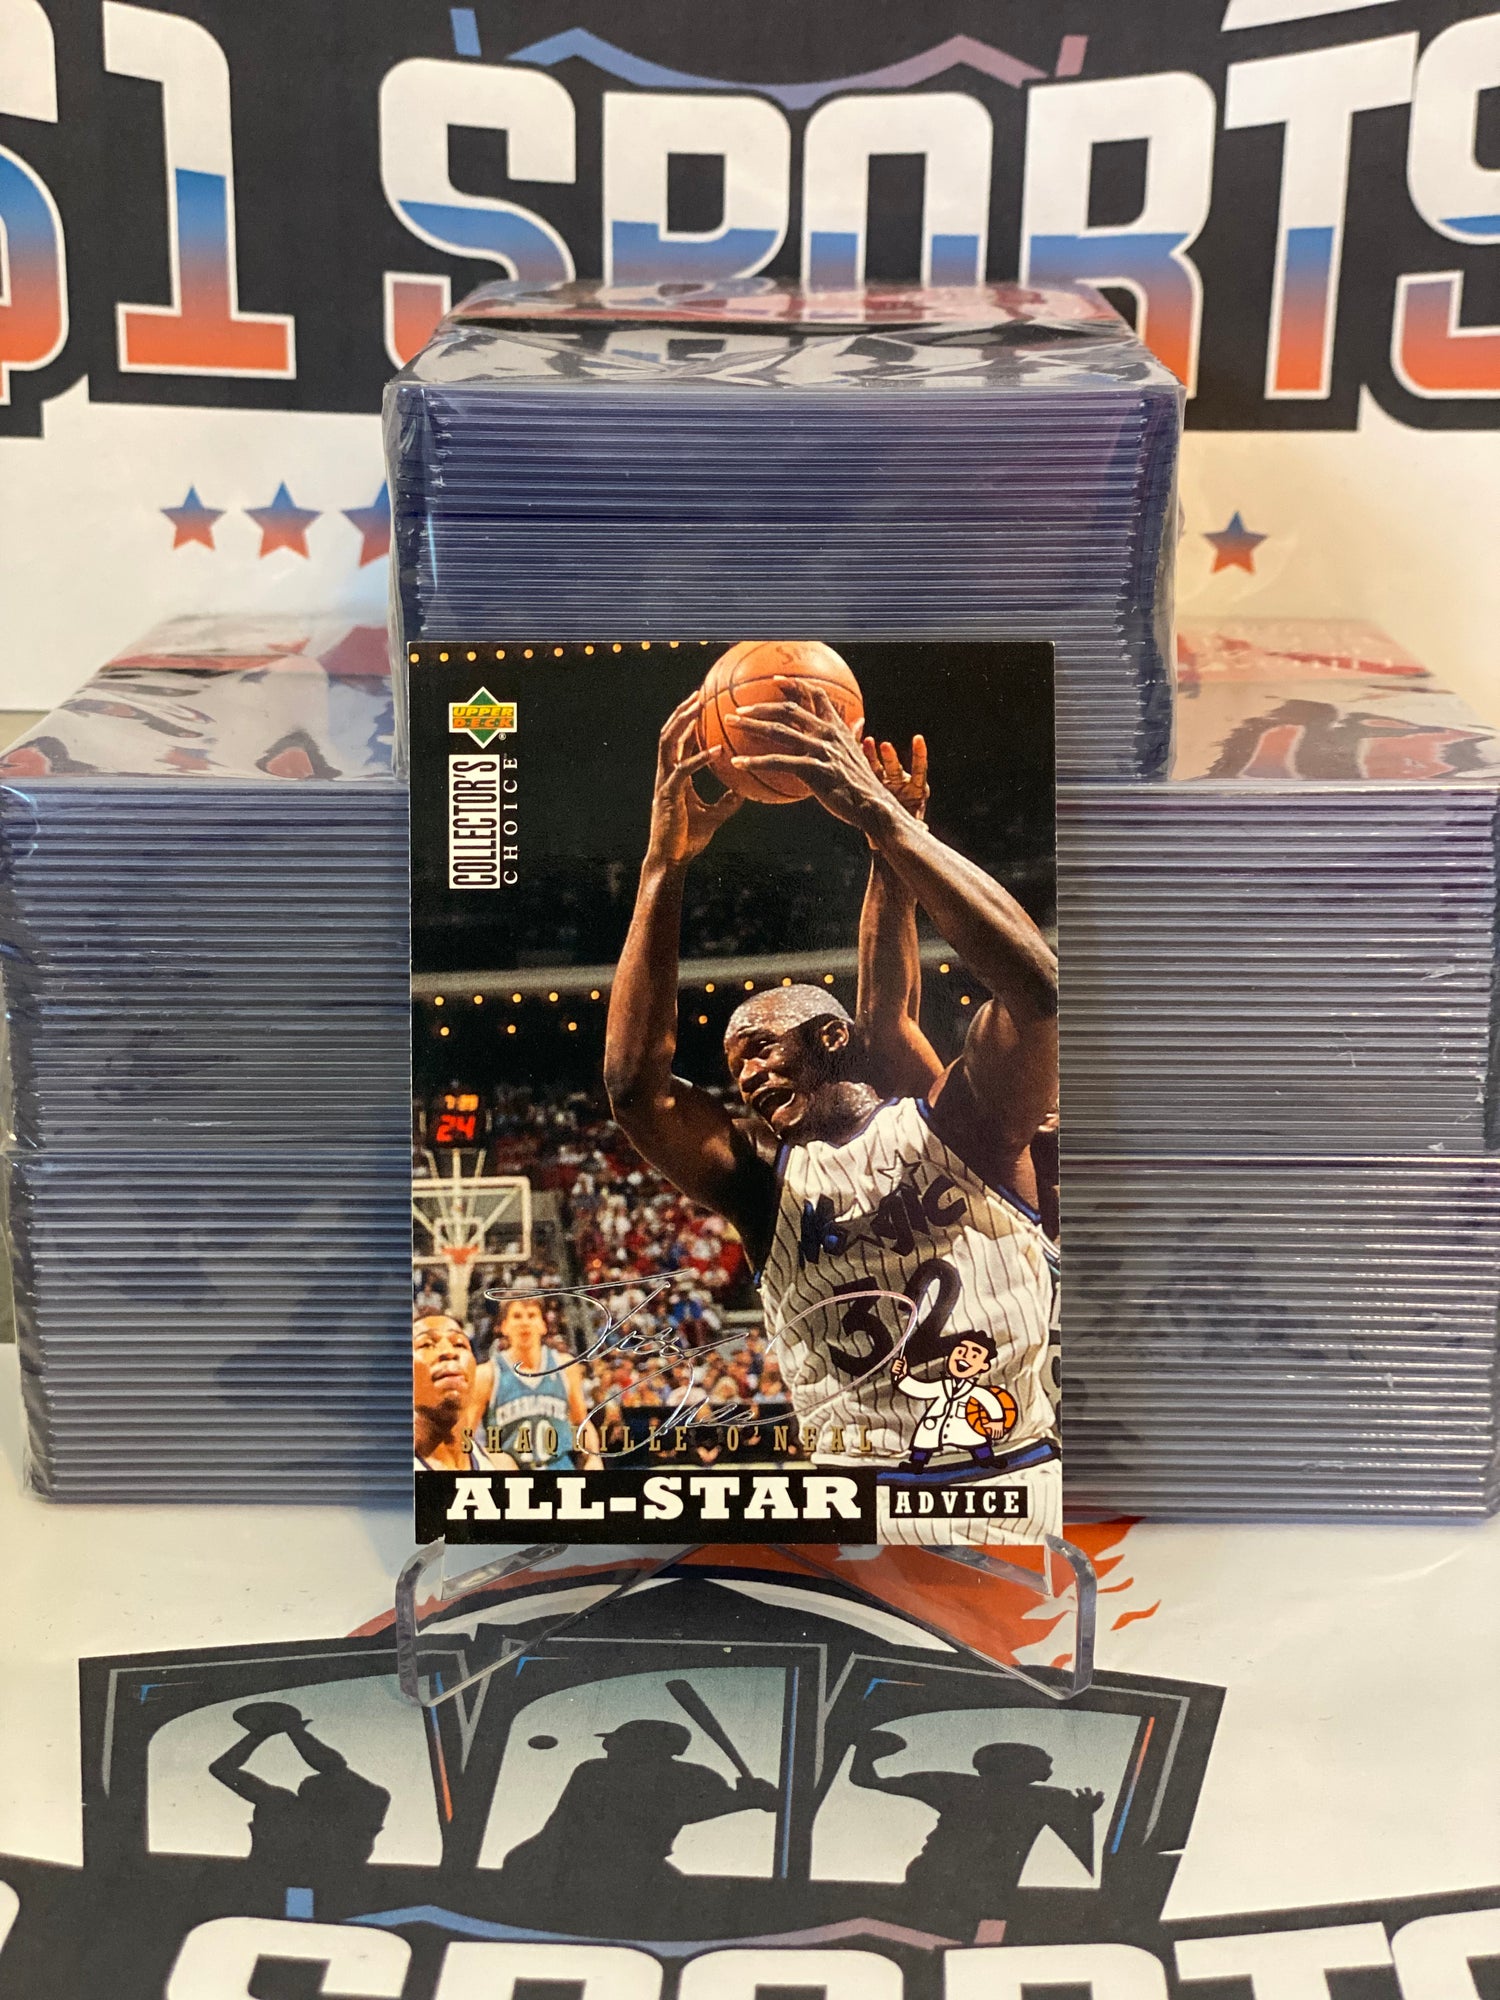 1994 Upper Deck Collector's Choice (Silver Signature, All-Star Advice) Shaquille O'Neal #197